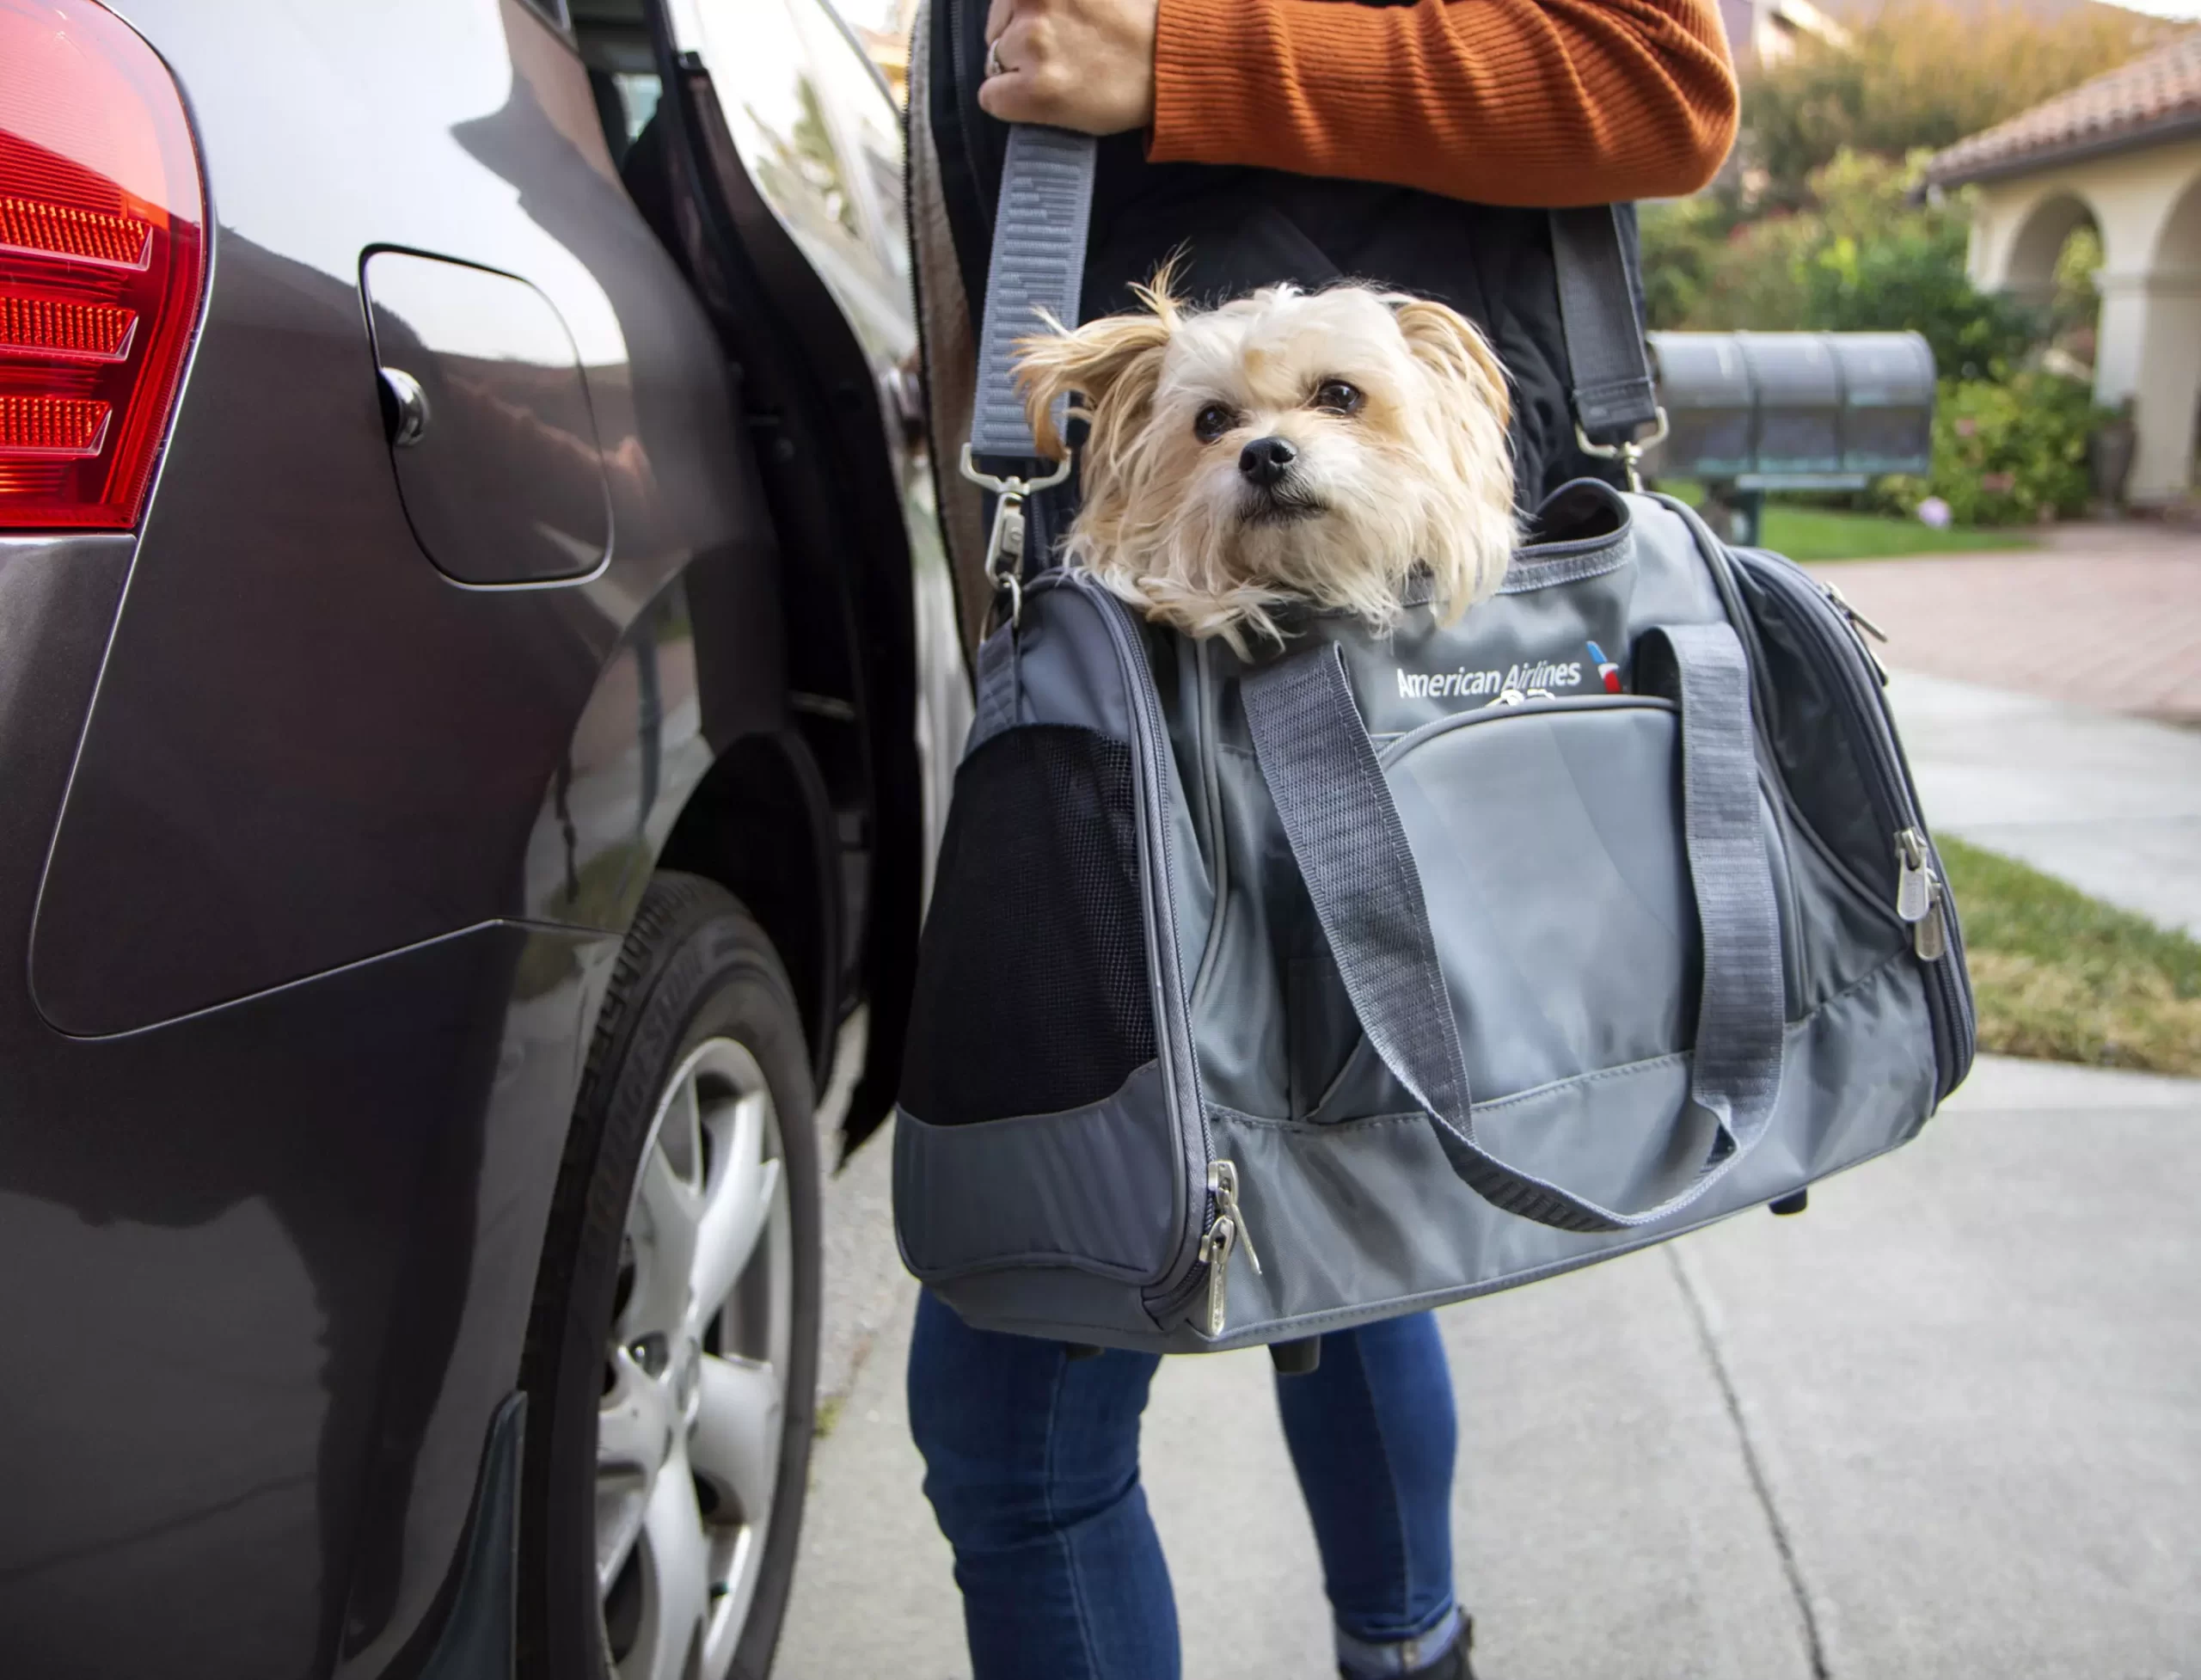 American Airlines Pet Policy Allowing Carry-On Pet Carriers